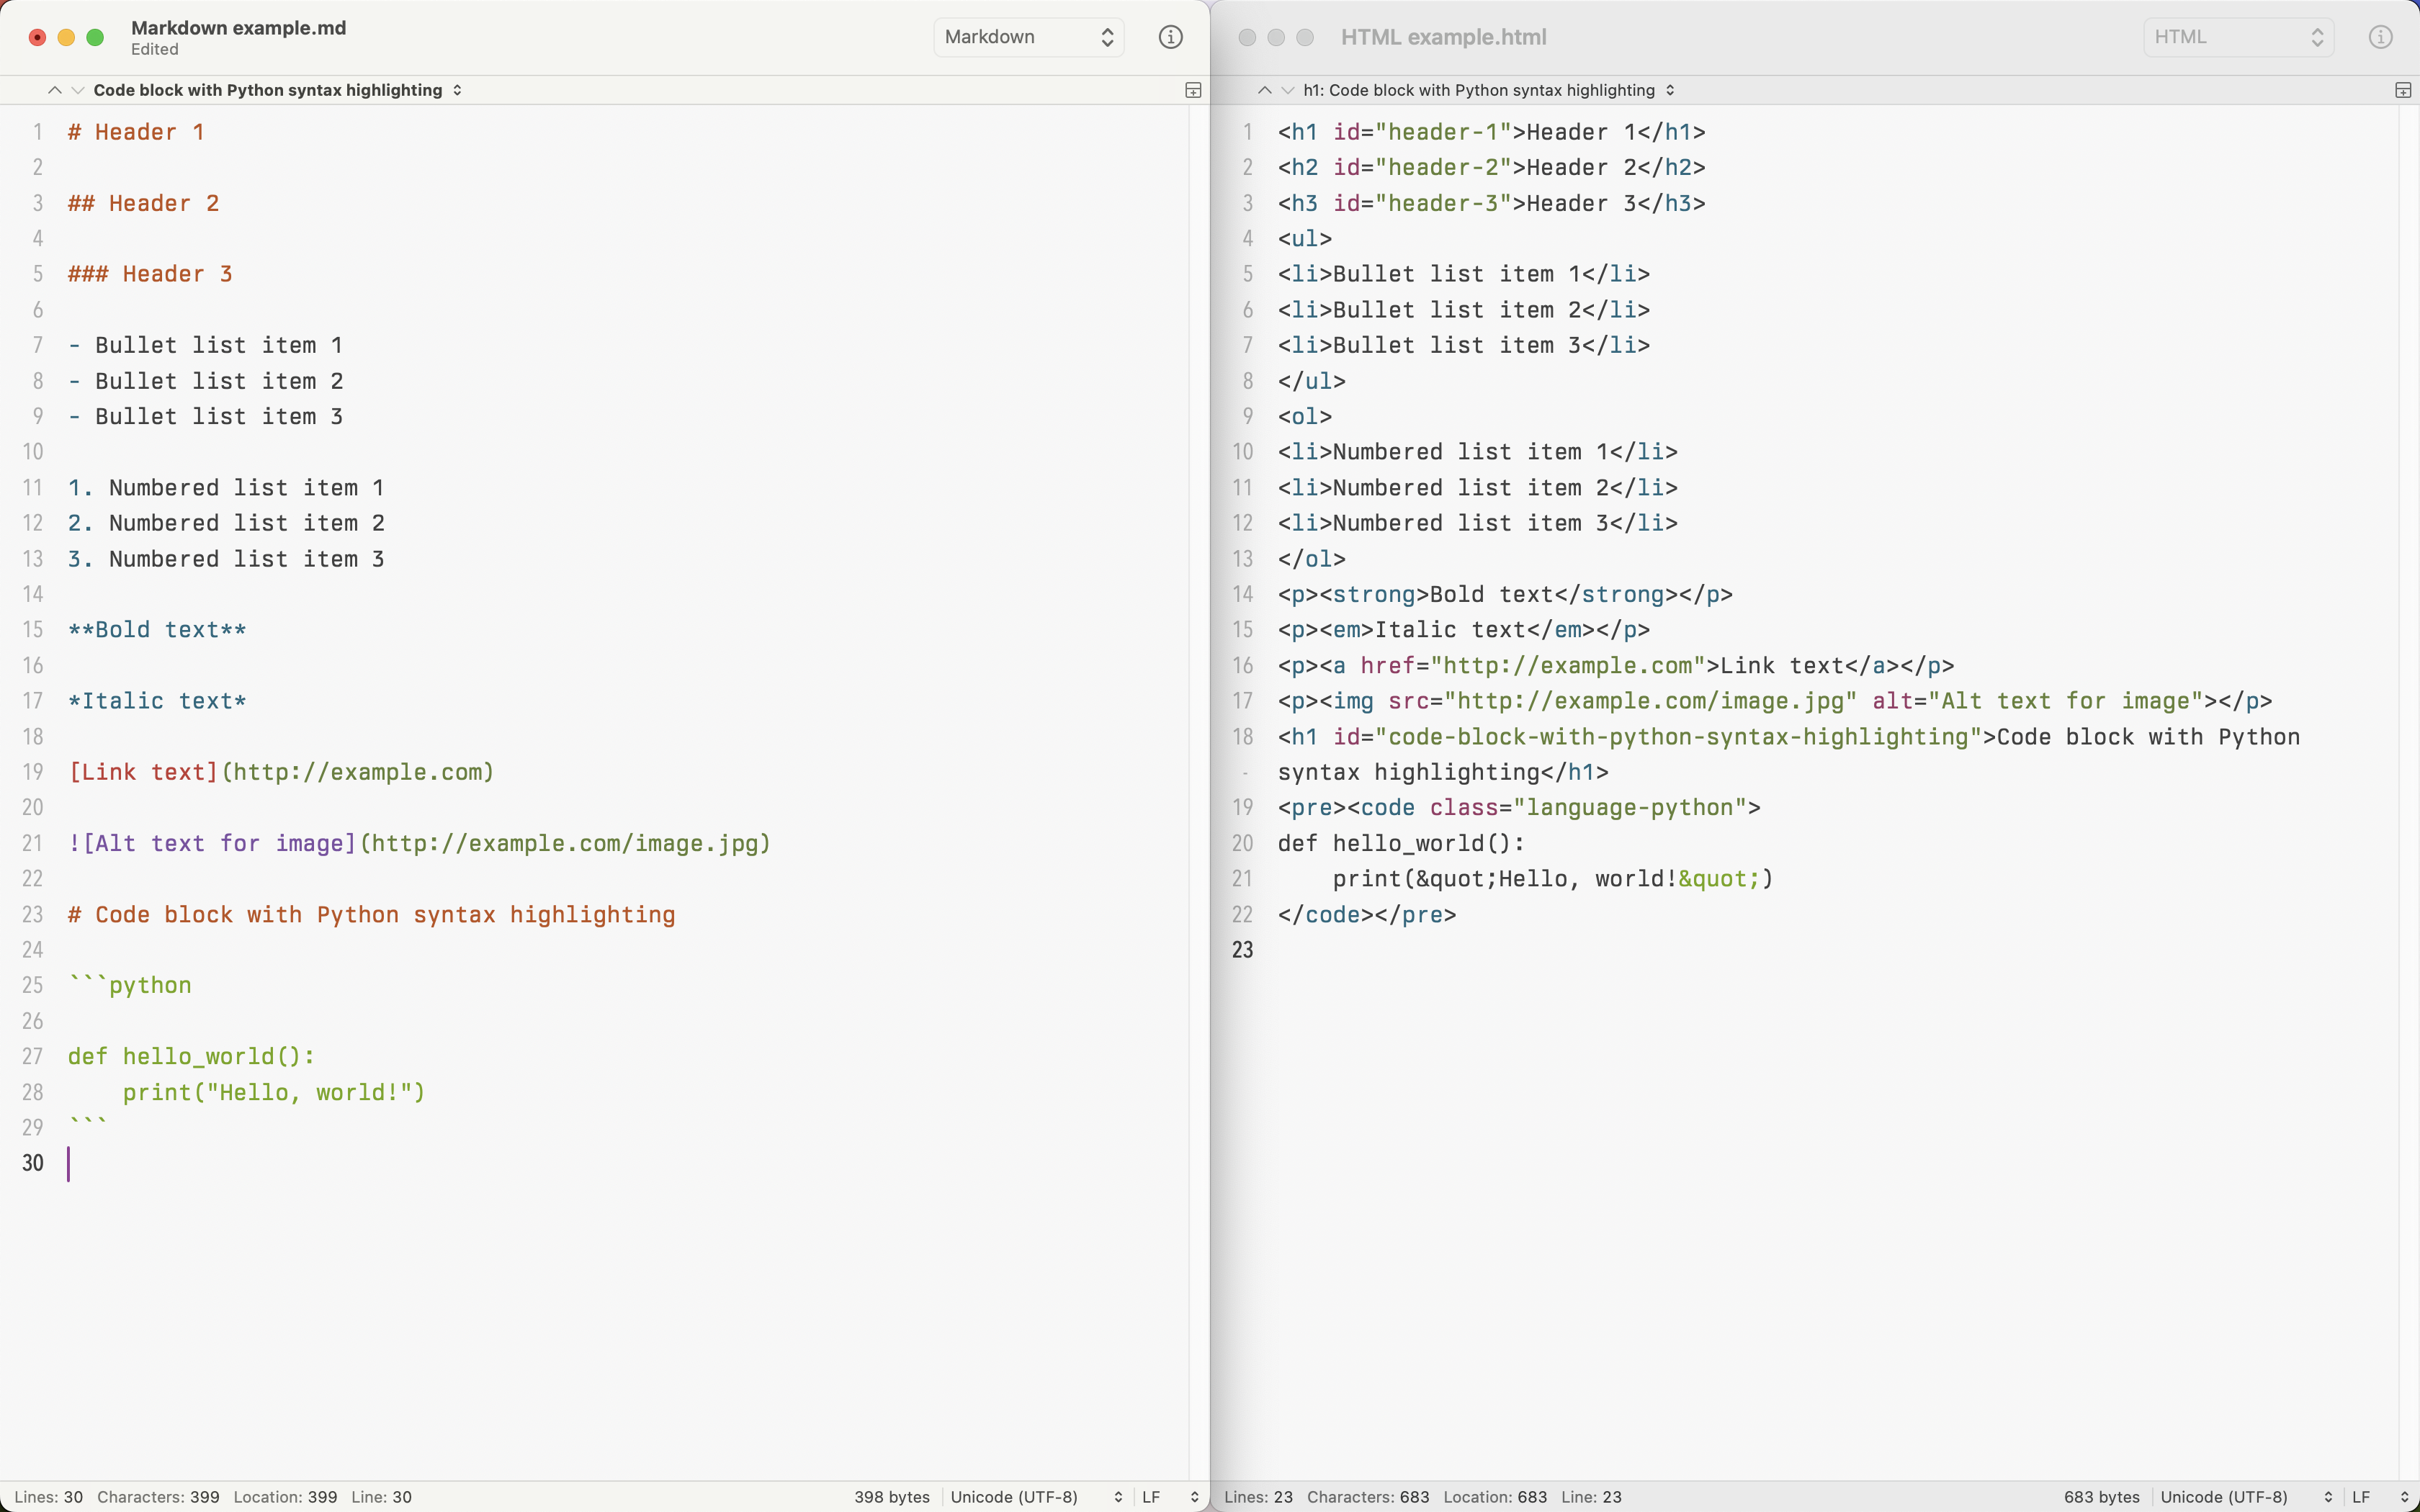 Screenshot showing a comparison between Markdown syntax on the left and the corresponding HTML code on the right.